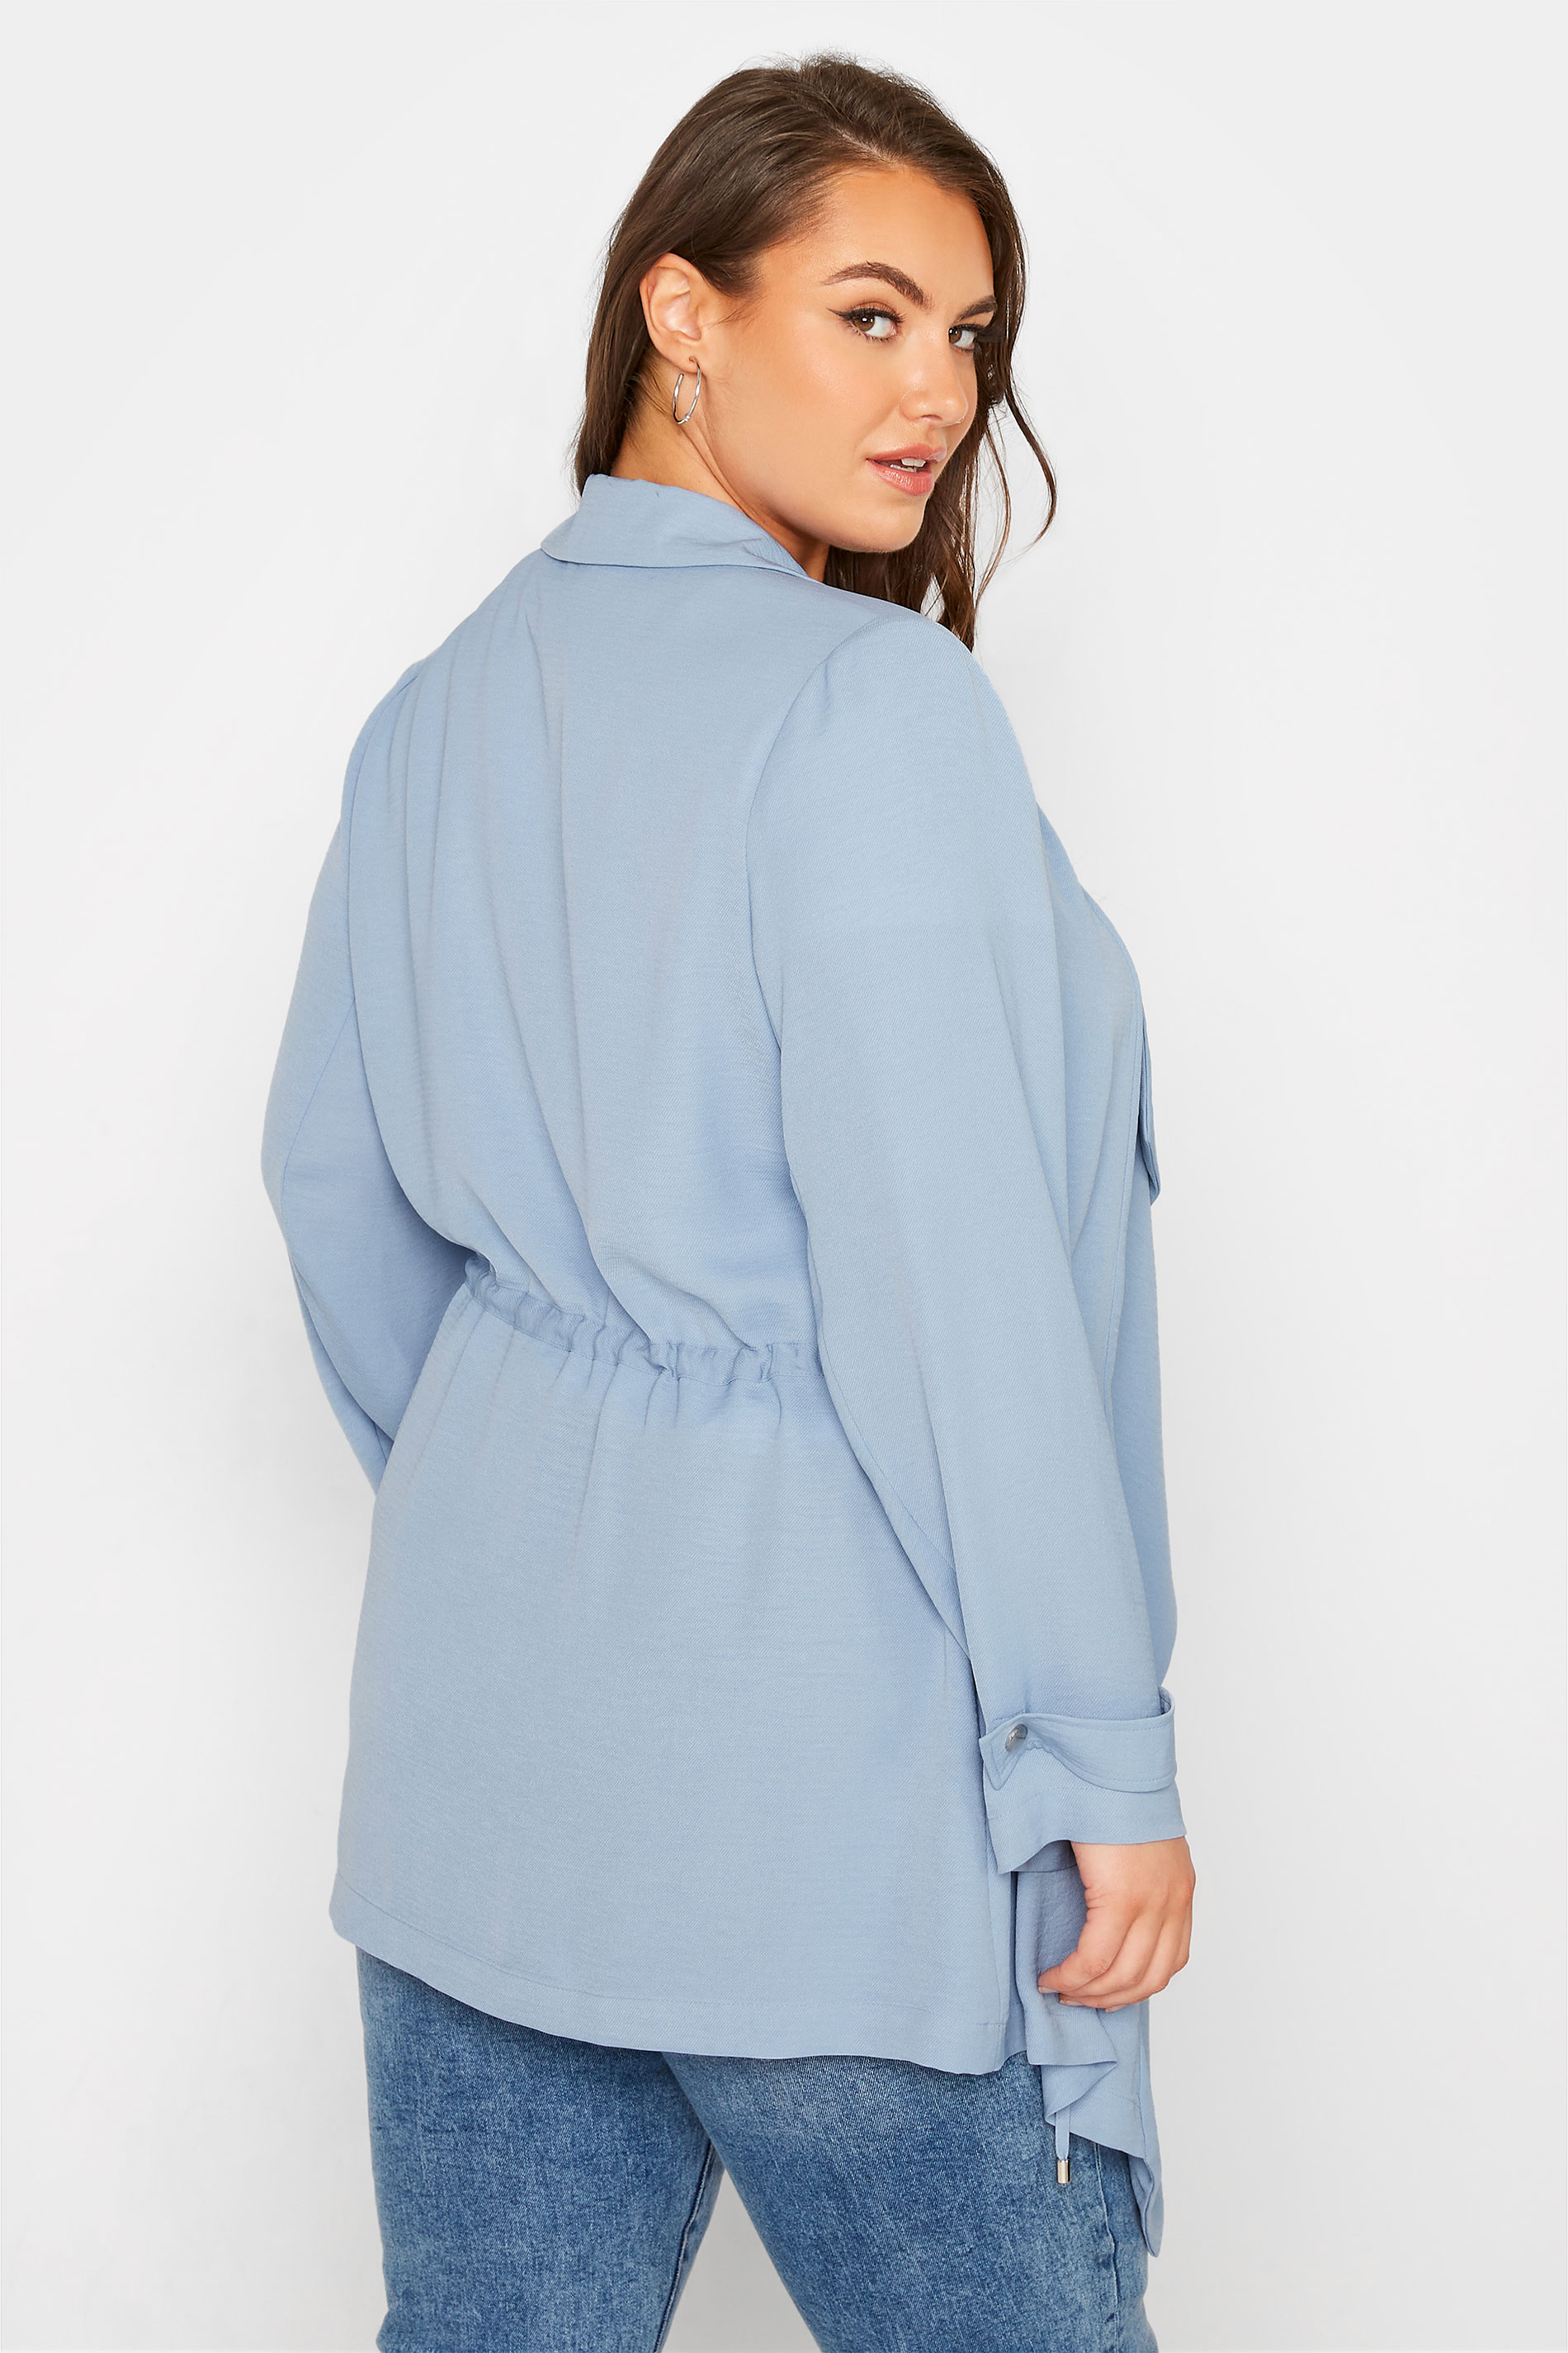 Plus Size Blue Waterfall Jacket | Yours Clothing  3